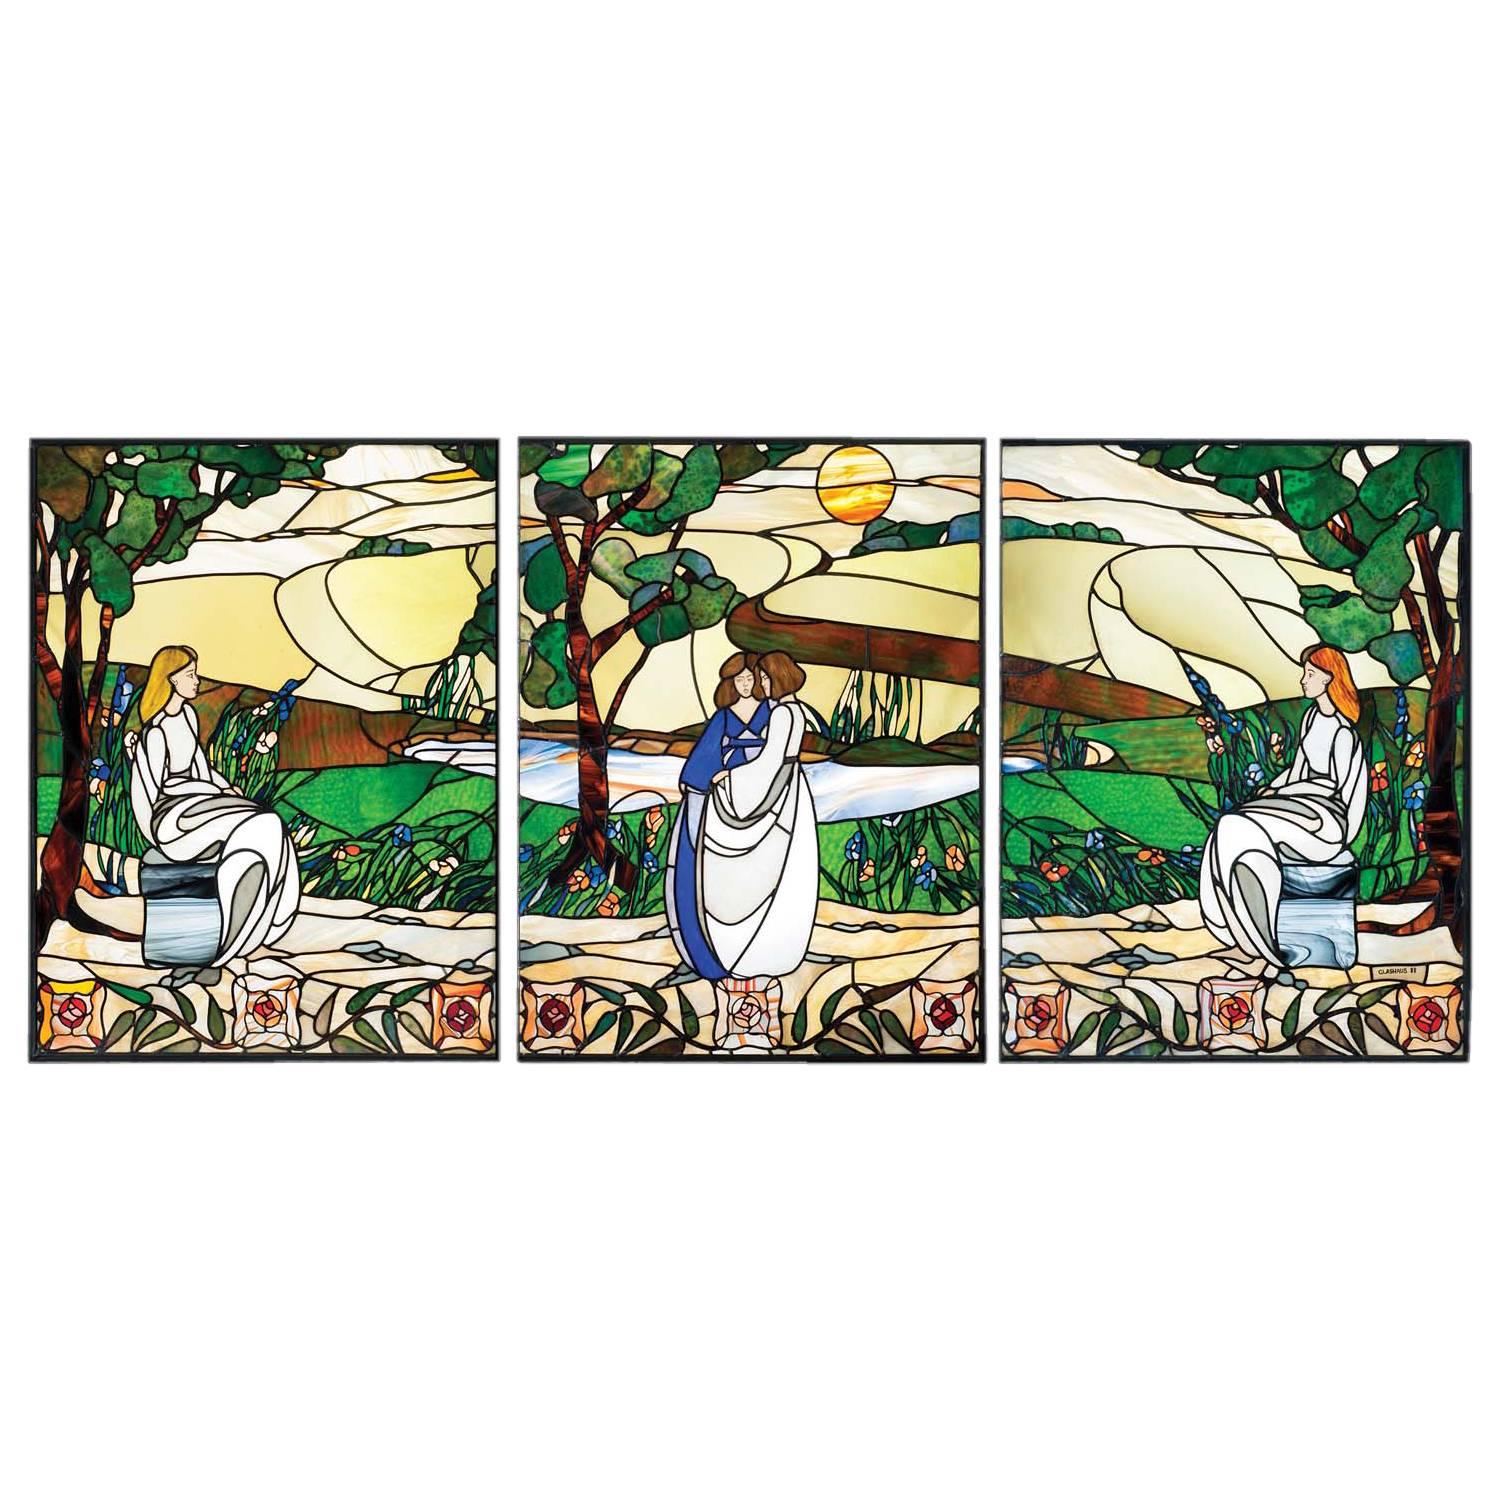 Are stained glass windows Art Deco?